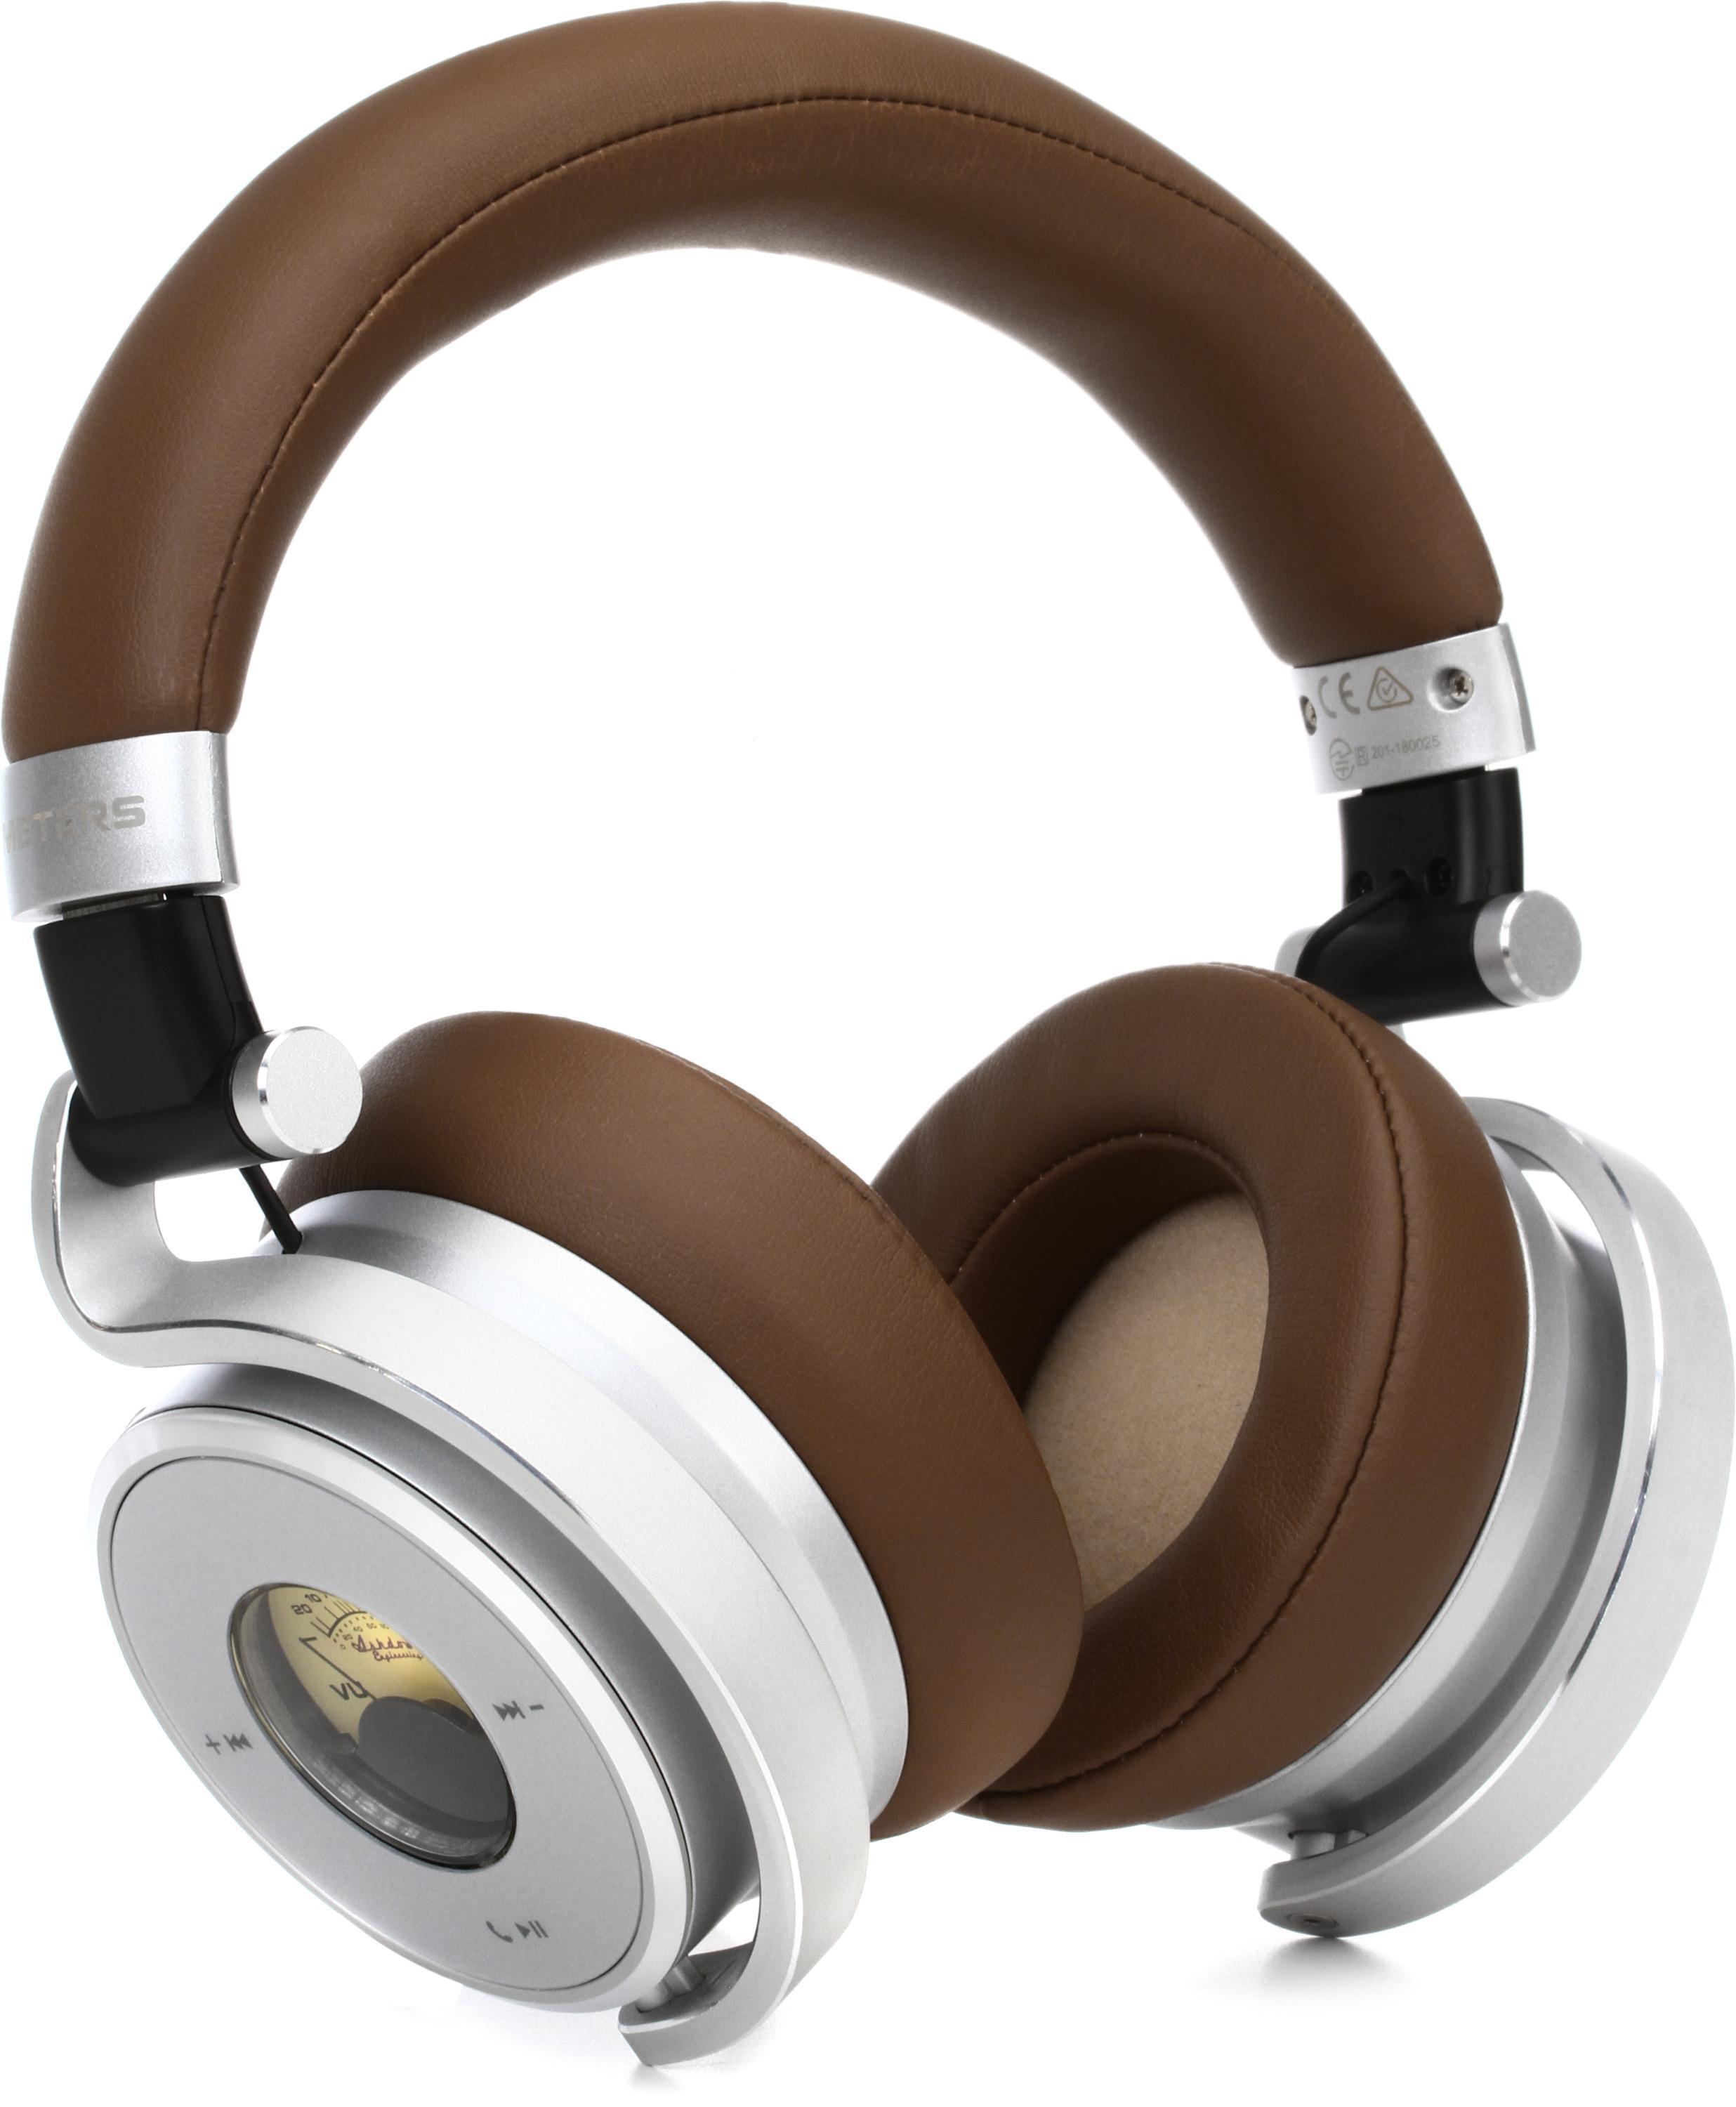 inner ear noise cancelling headphones - OFF-54% >Free Delivery